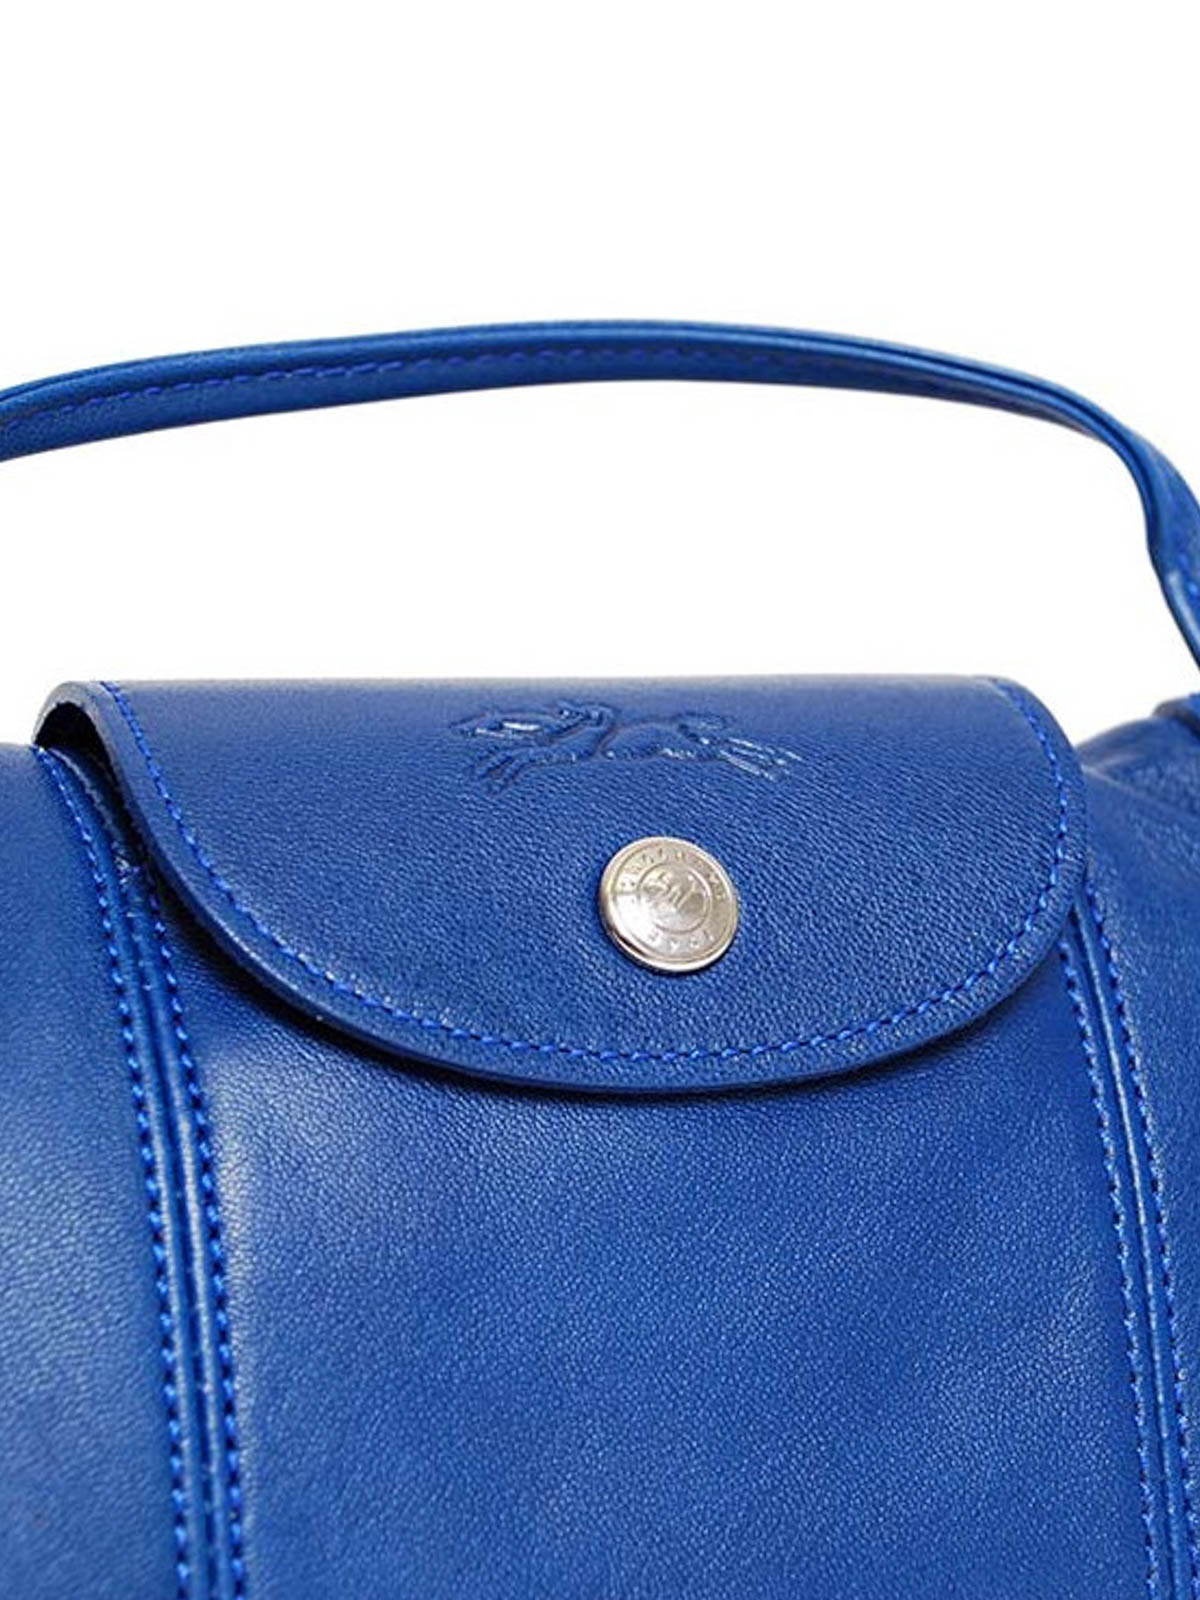 New Longchamp BLUE leather Lambskin Le Pliage Cuir Backpack purse